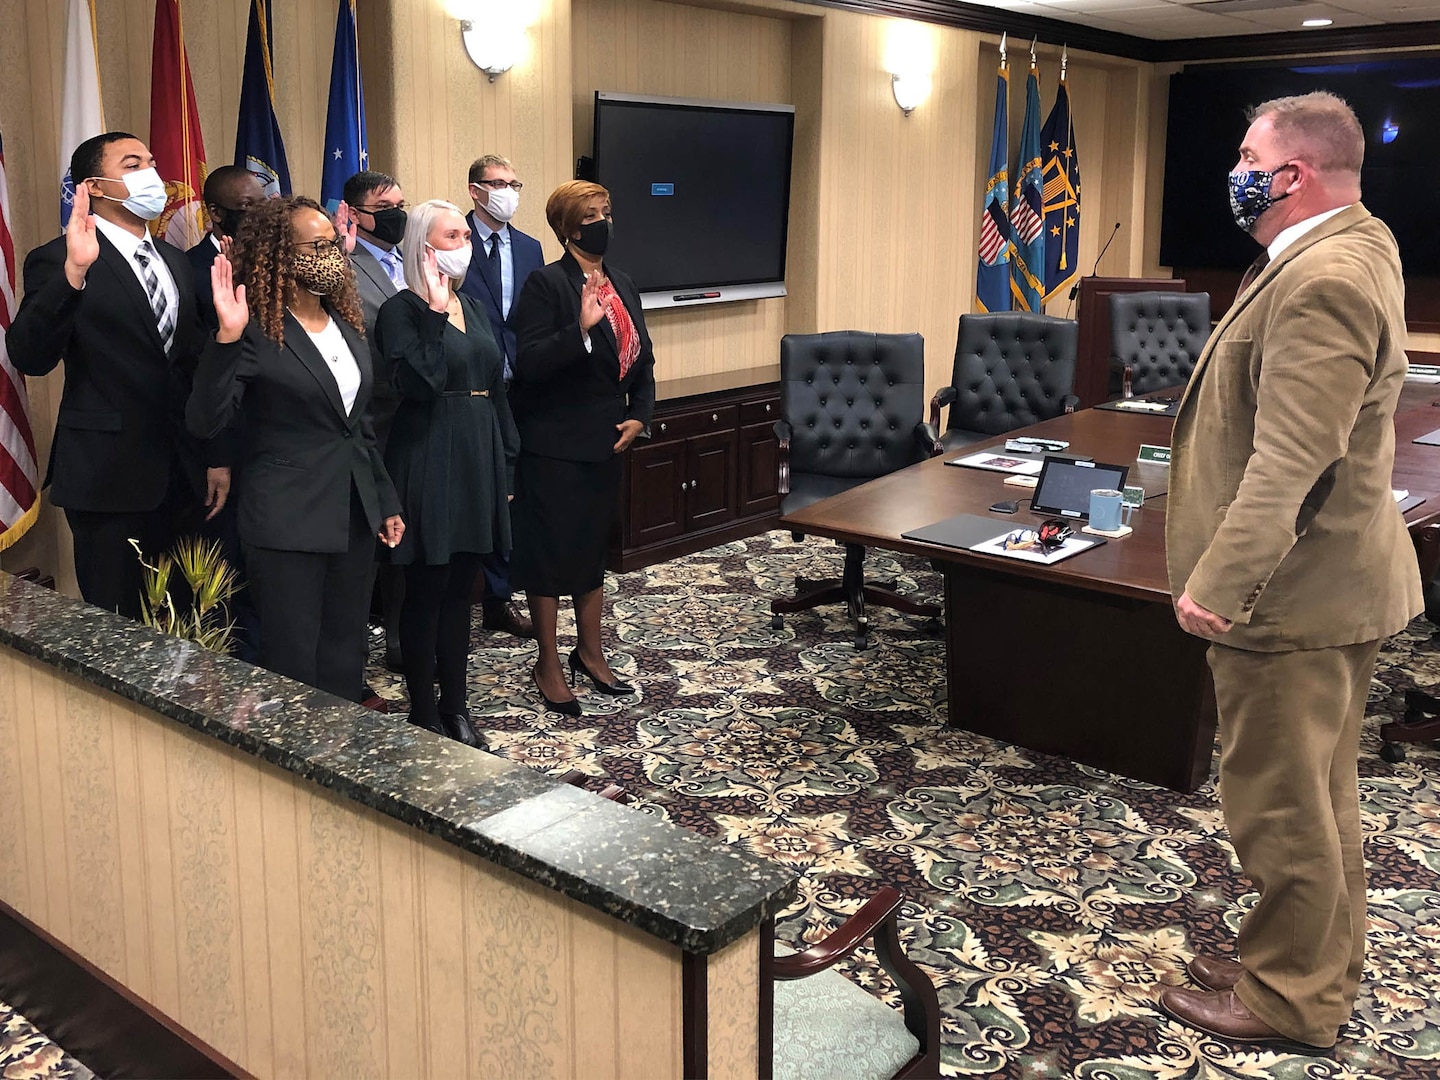 DLA Disposition Services Director Mike Cannon swears in new Pathways to Career Excellence Program participants at a Jan. 7 Oath of Office event. Shown taking the oath in the front row are, from left to right, Sabrina Young, Danielle Woods, and Margarietta Glass. In the back row are Jeremiah Burns, Michael Vaughn, Ryan Riedel, and Brandon Awkerman.